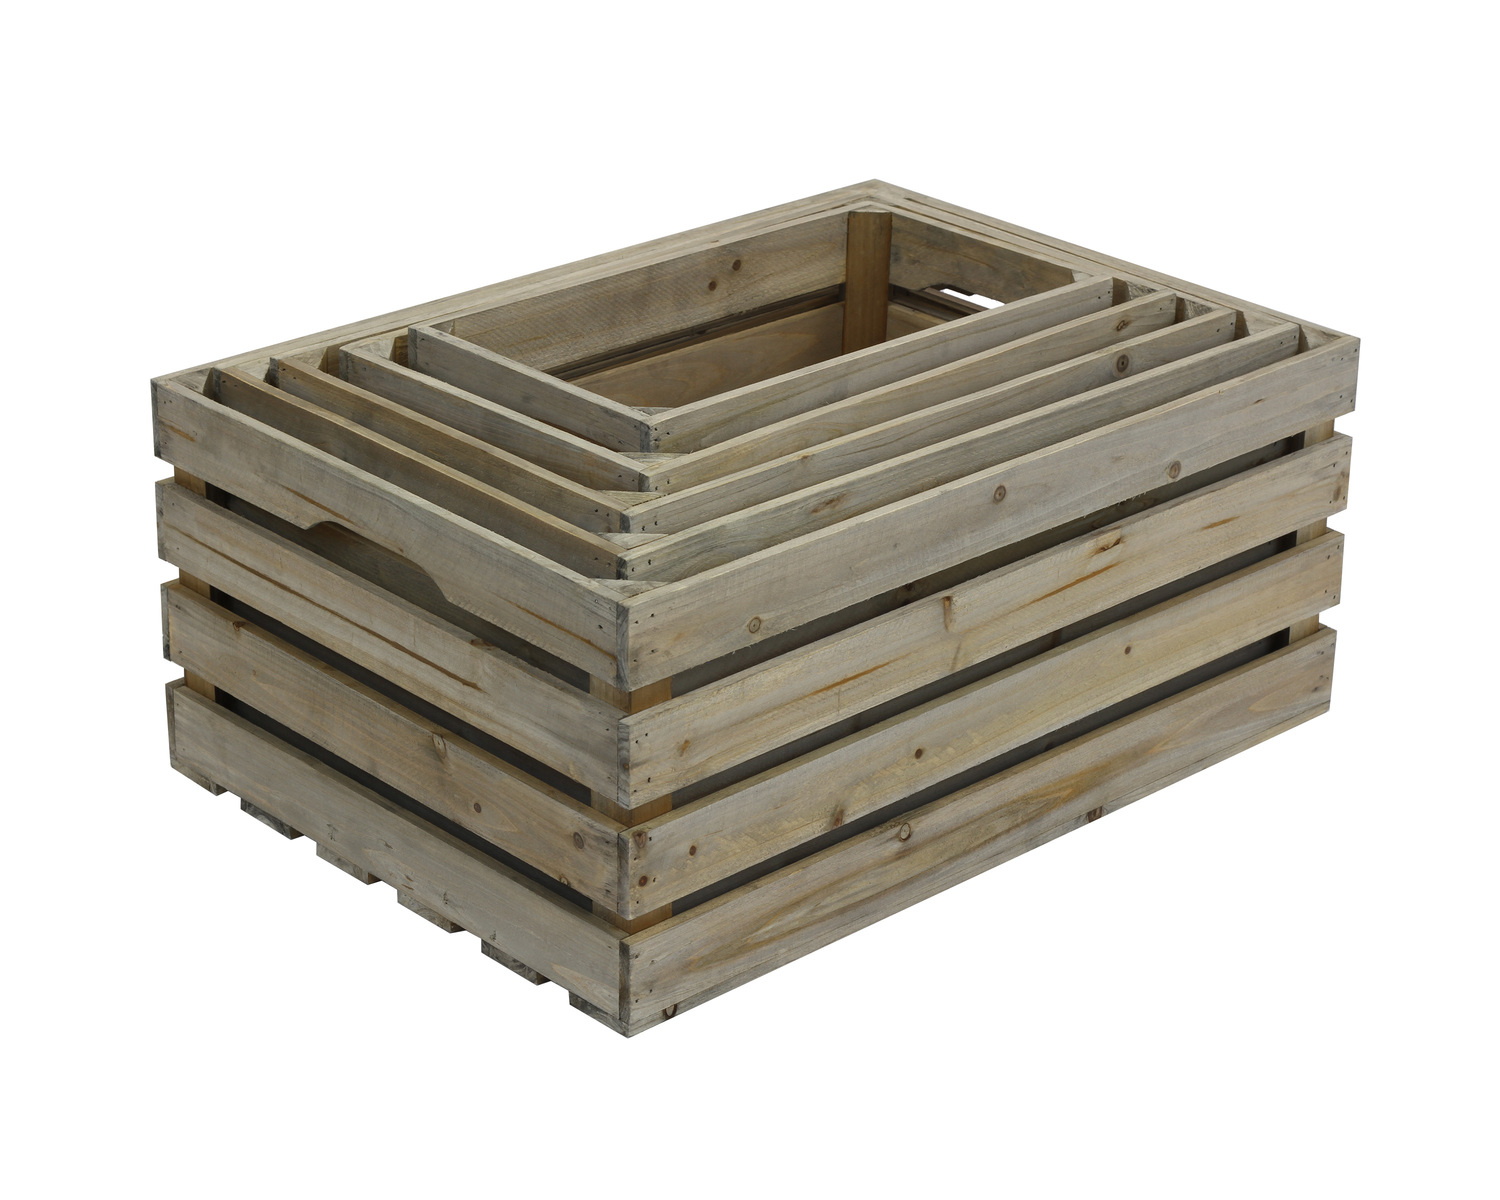 Wooden crate 20x15.25x9.25 Inches Outside Dimenions